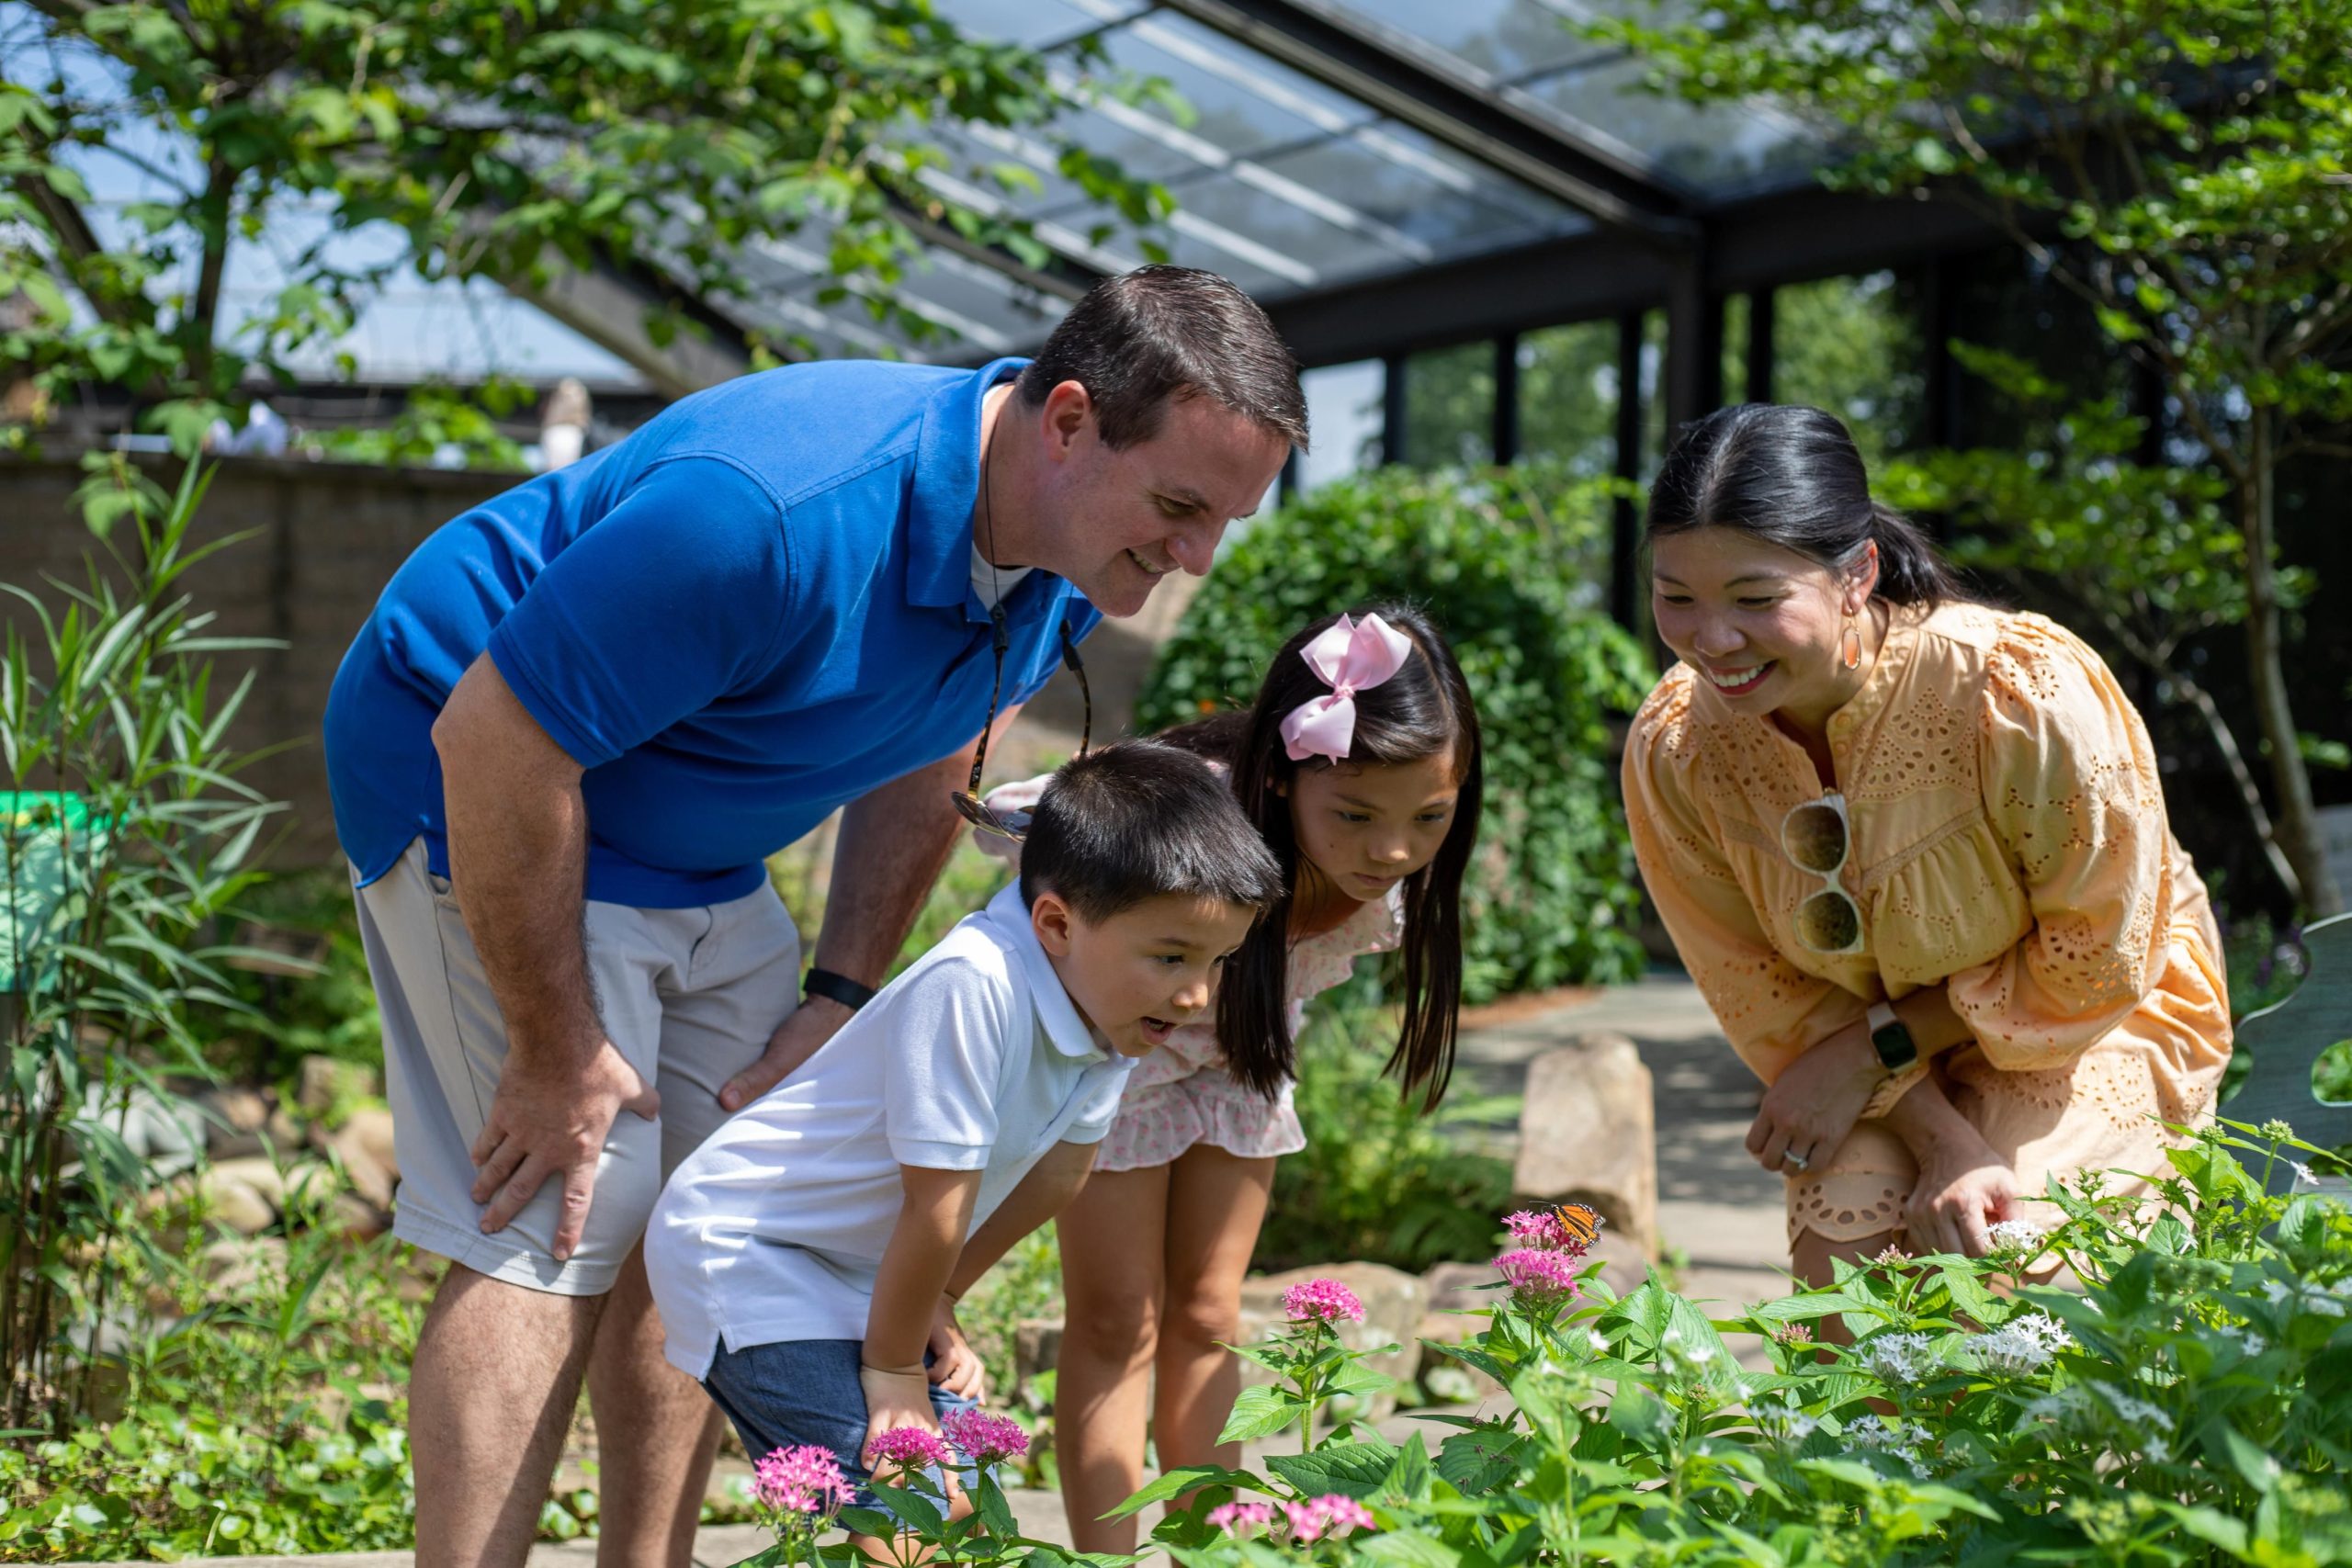 Open year-round, the Huntsville Botanic Garden invites guests to explore all the beauty and wonder of its grassy meadows, woodland paths, aquatic habitats and stunning floral collections.